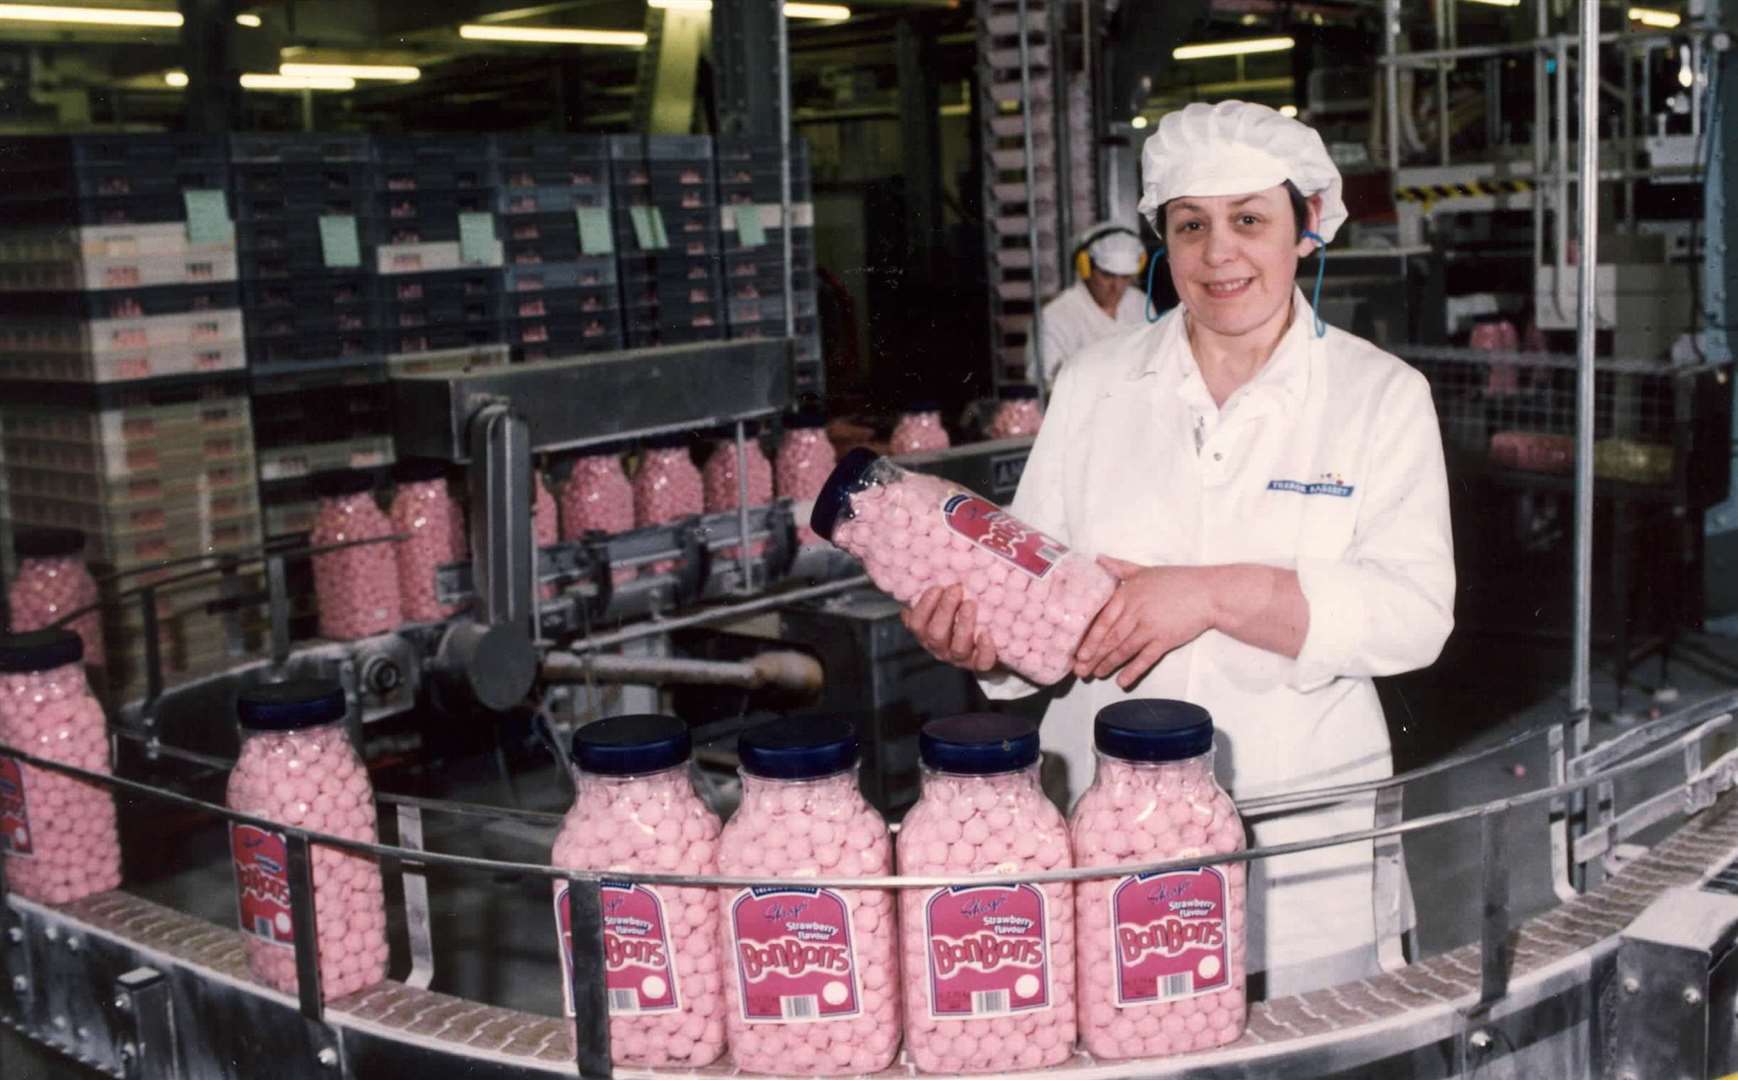 The Trebor sweets factory in Maidstone in 1996